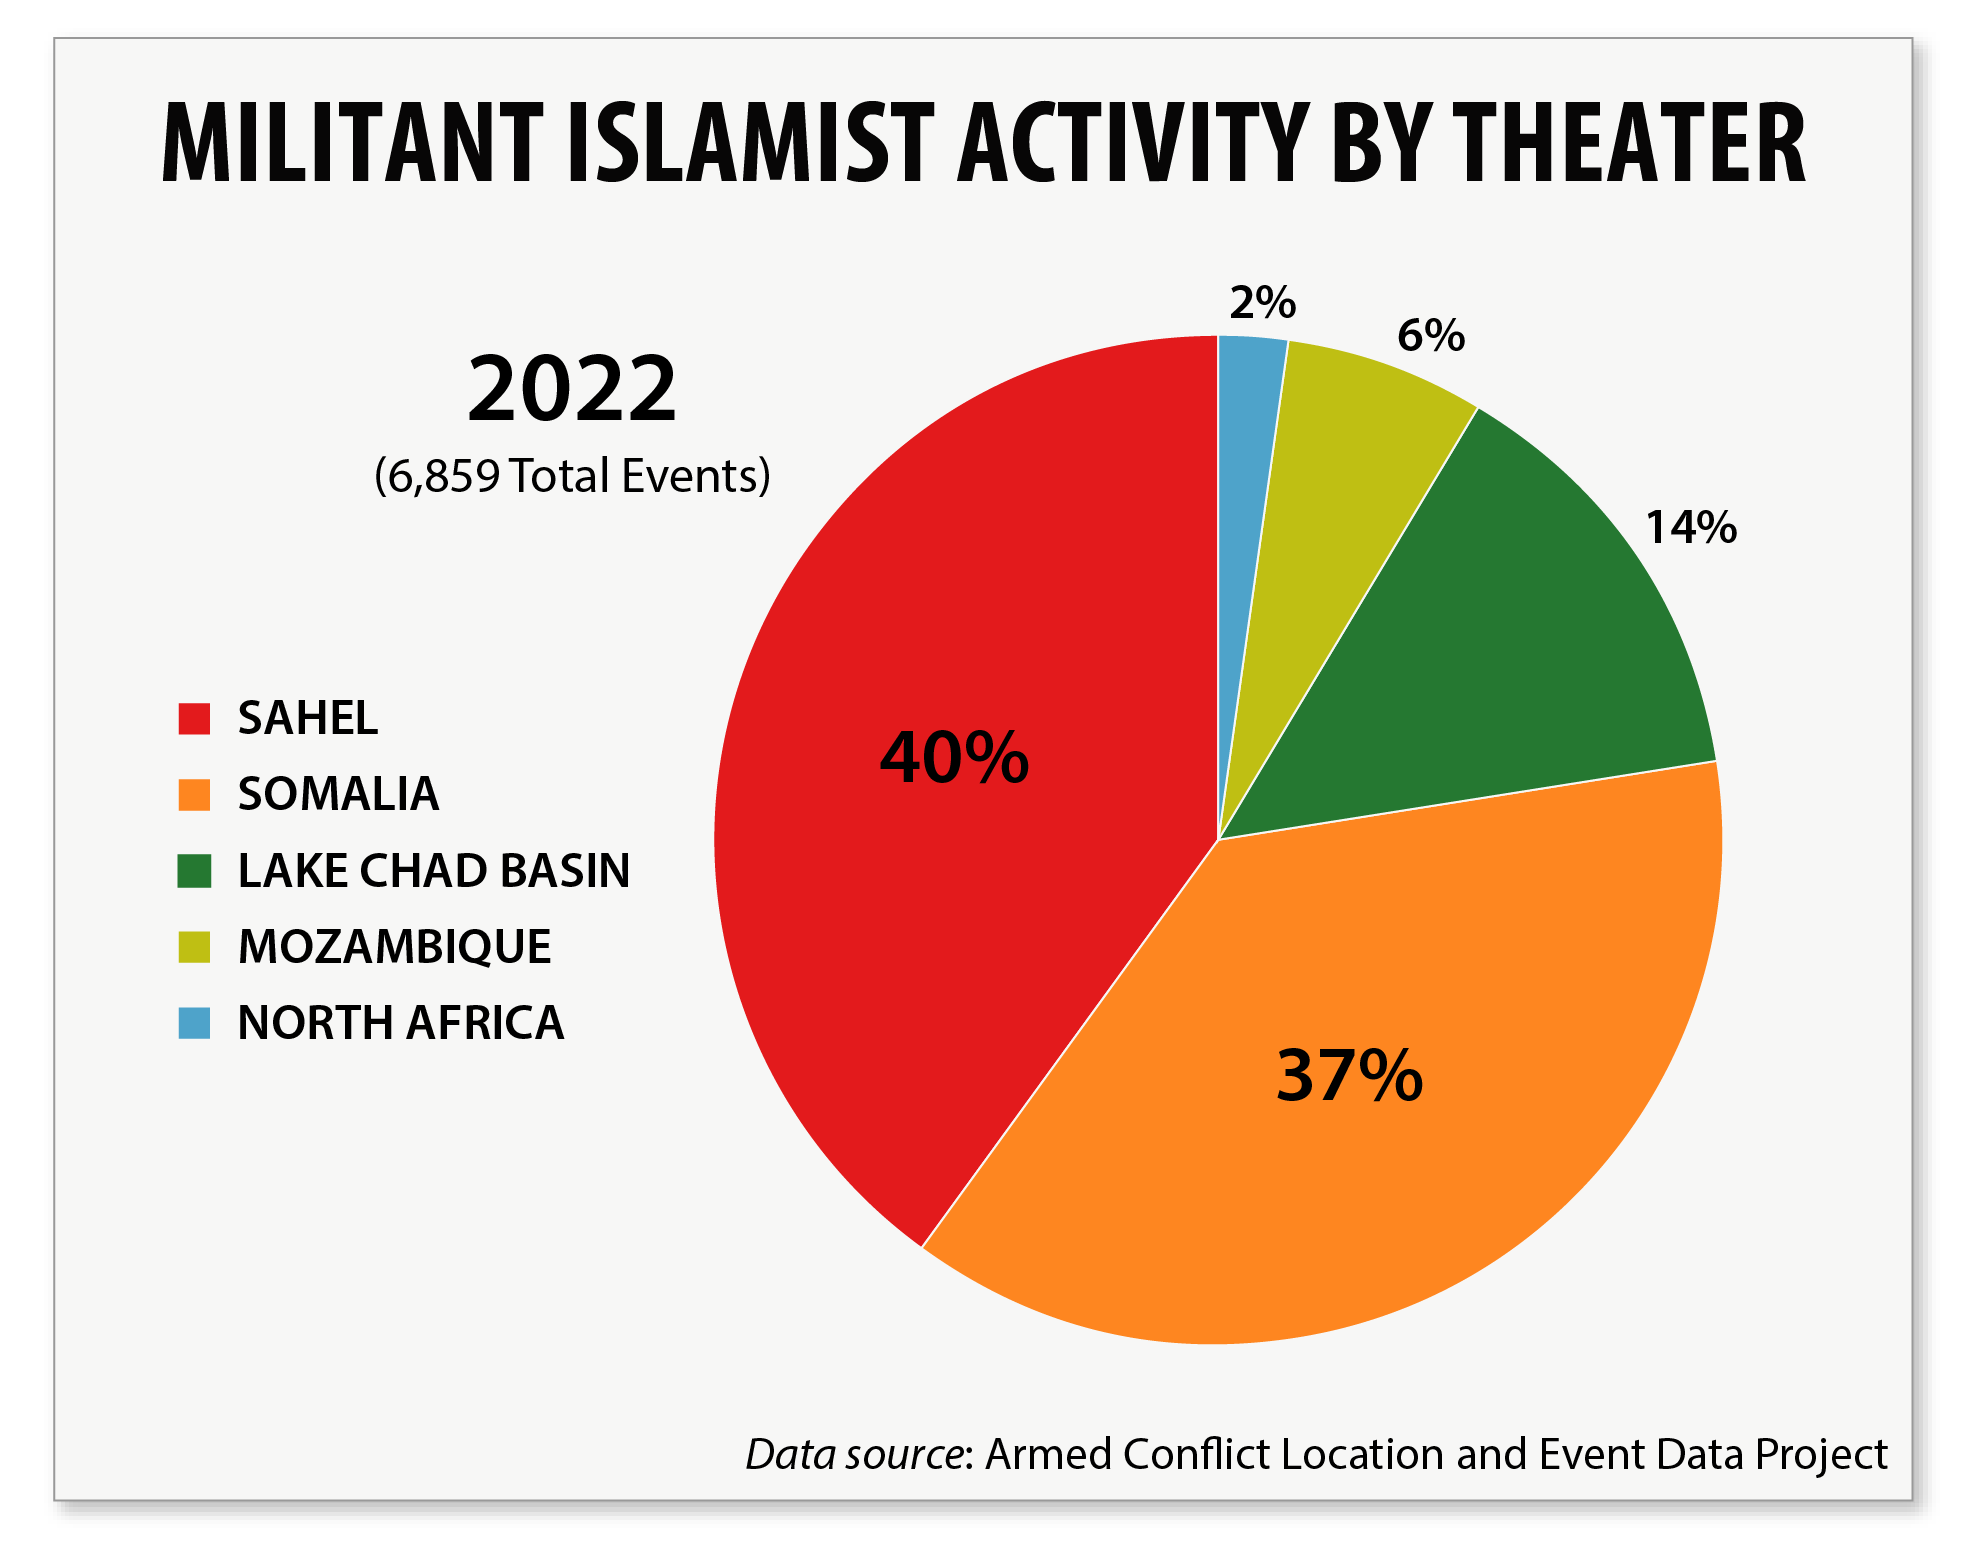 Pie chart of militant Islamist activity by theater in 2022.